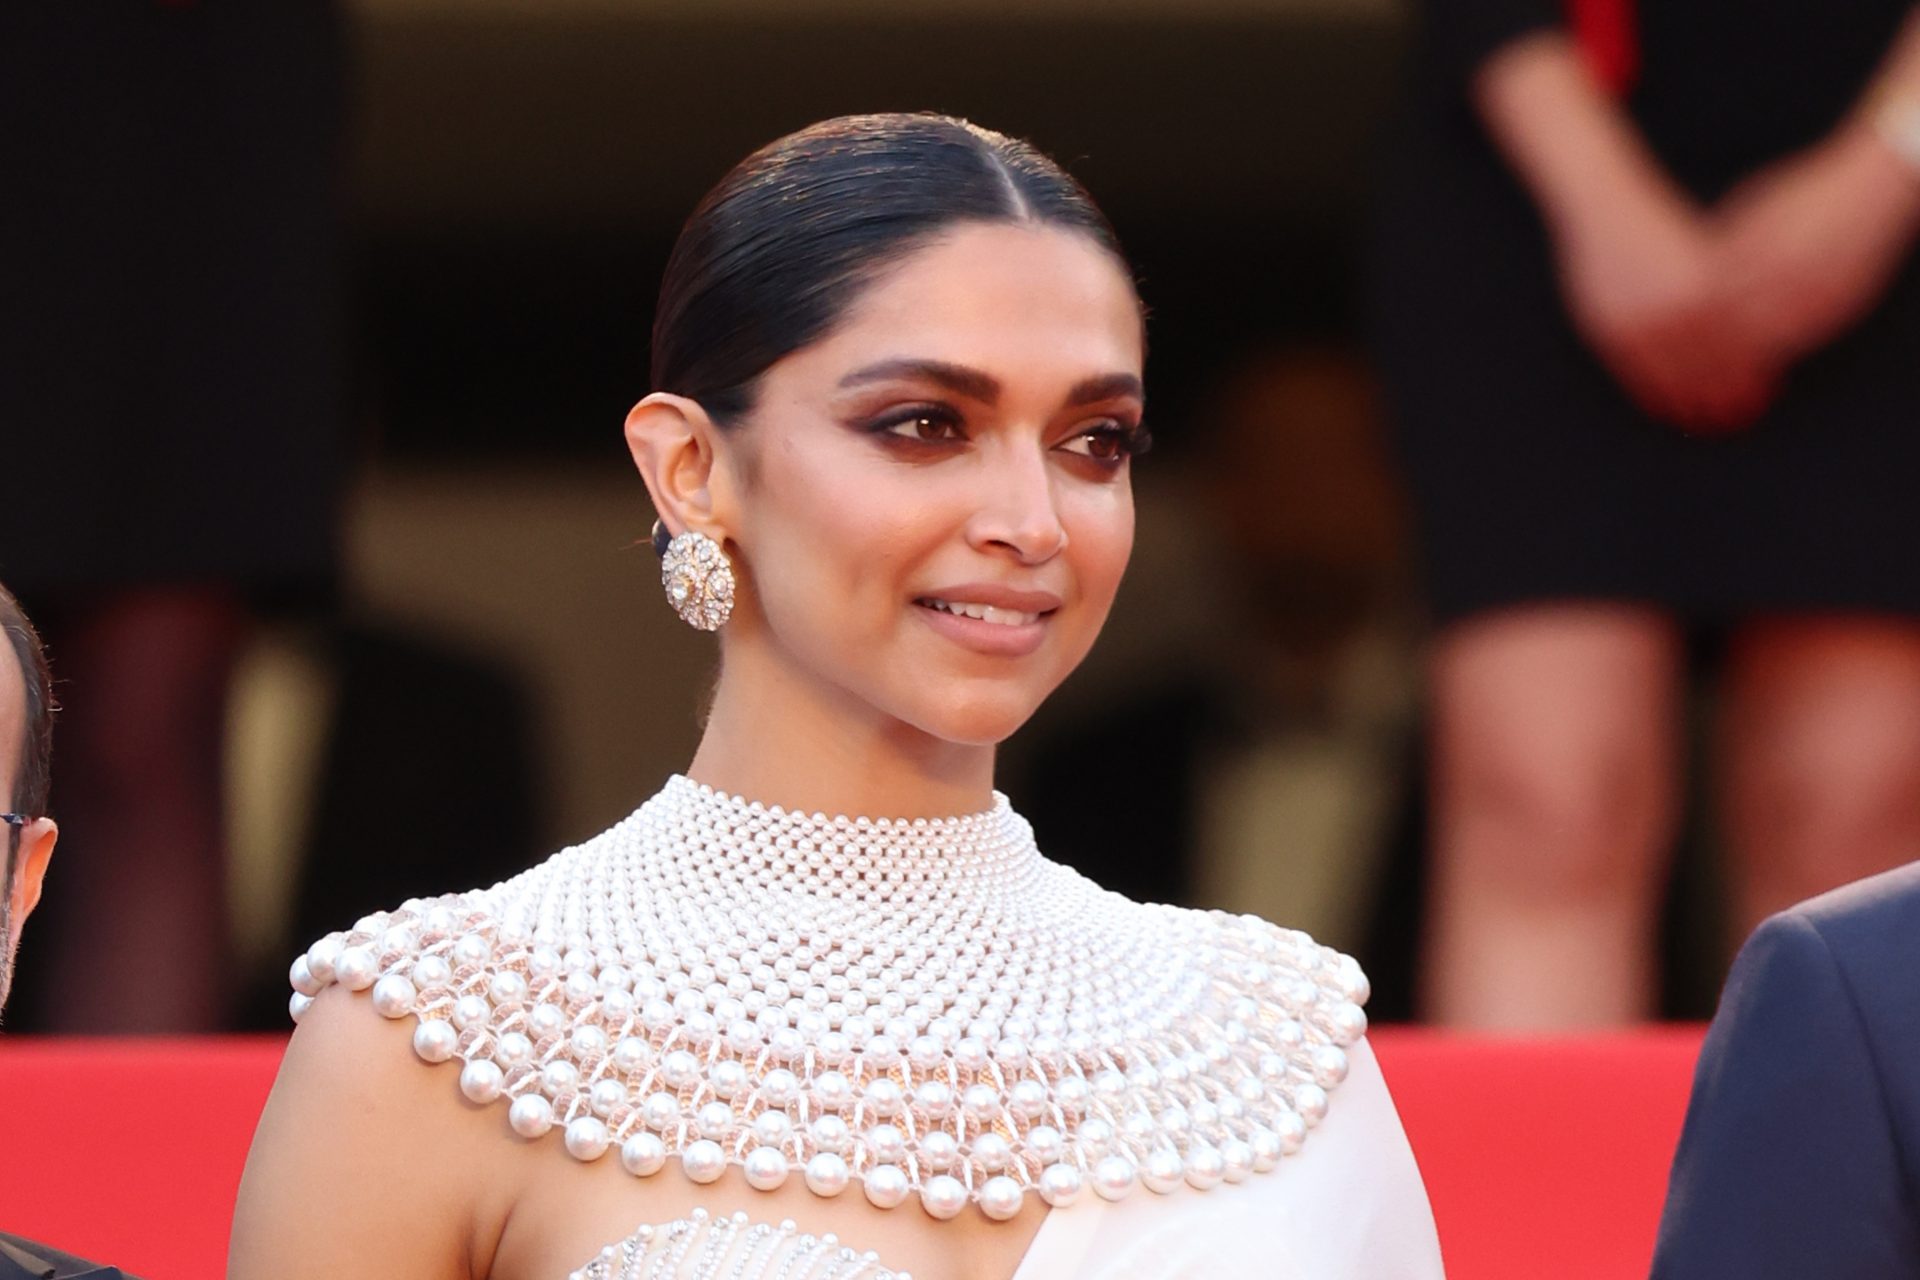 You and I - Deepika Padukone joined Cartier for its gala